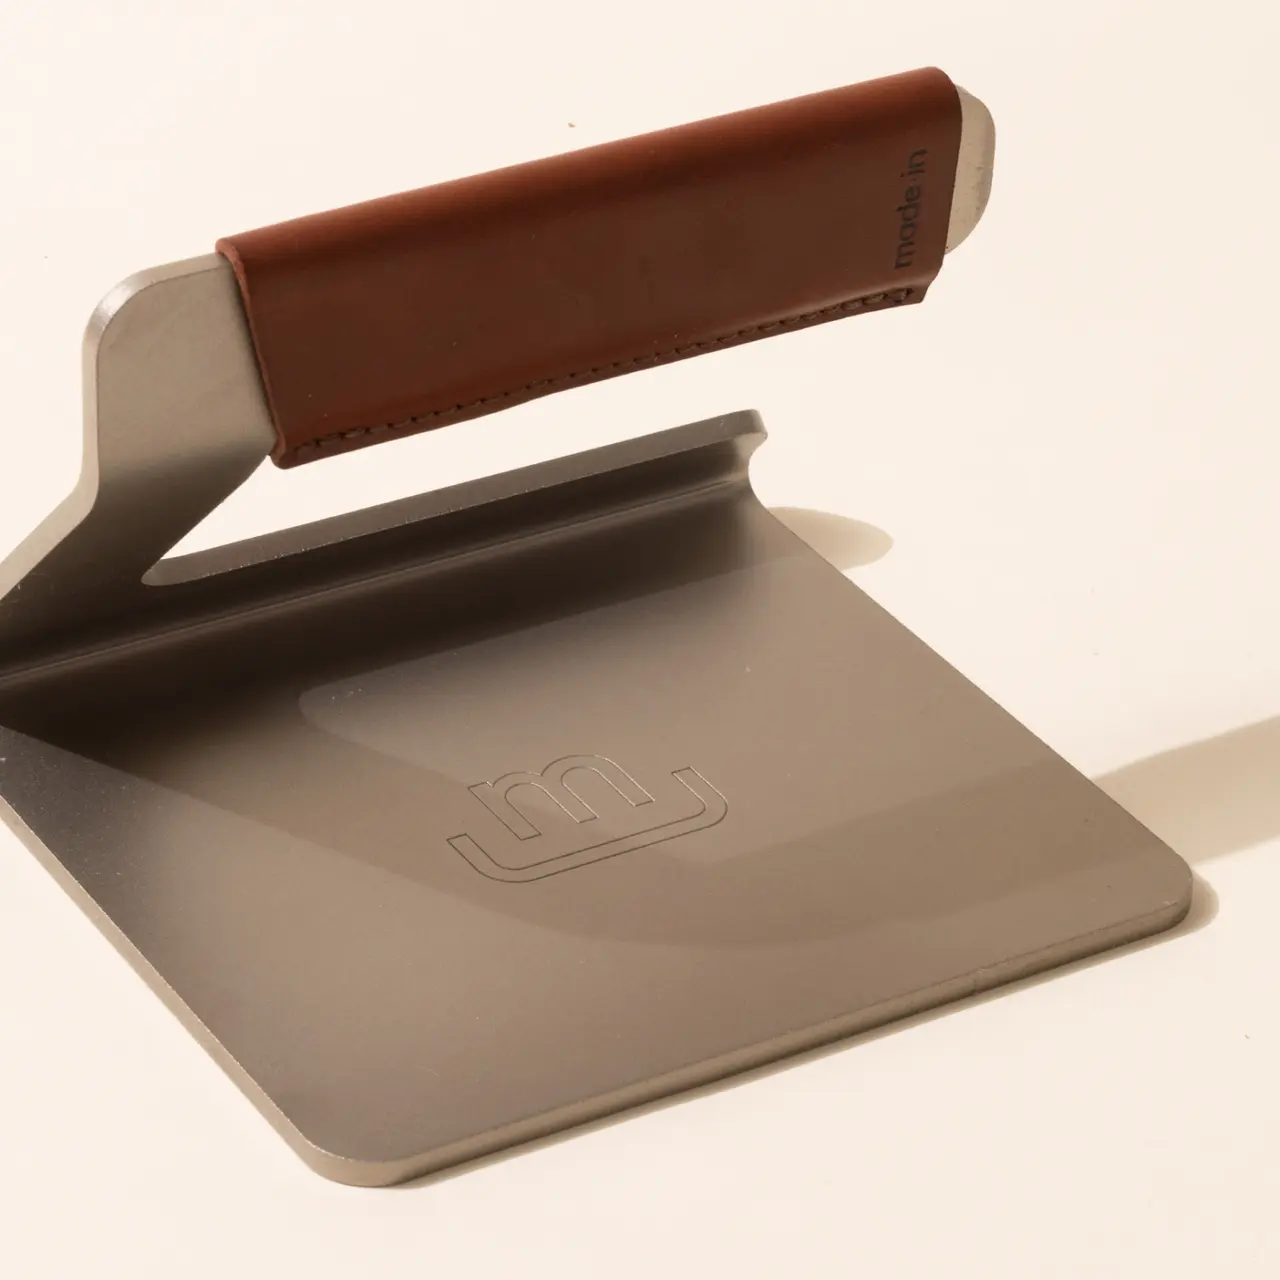 A close-up of a sleek, modern hole punch with a metallic finish and a brown padded handle, casting a shadow on a plain surface.